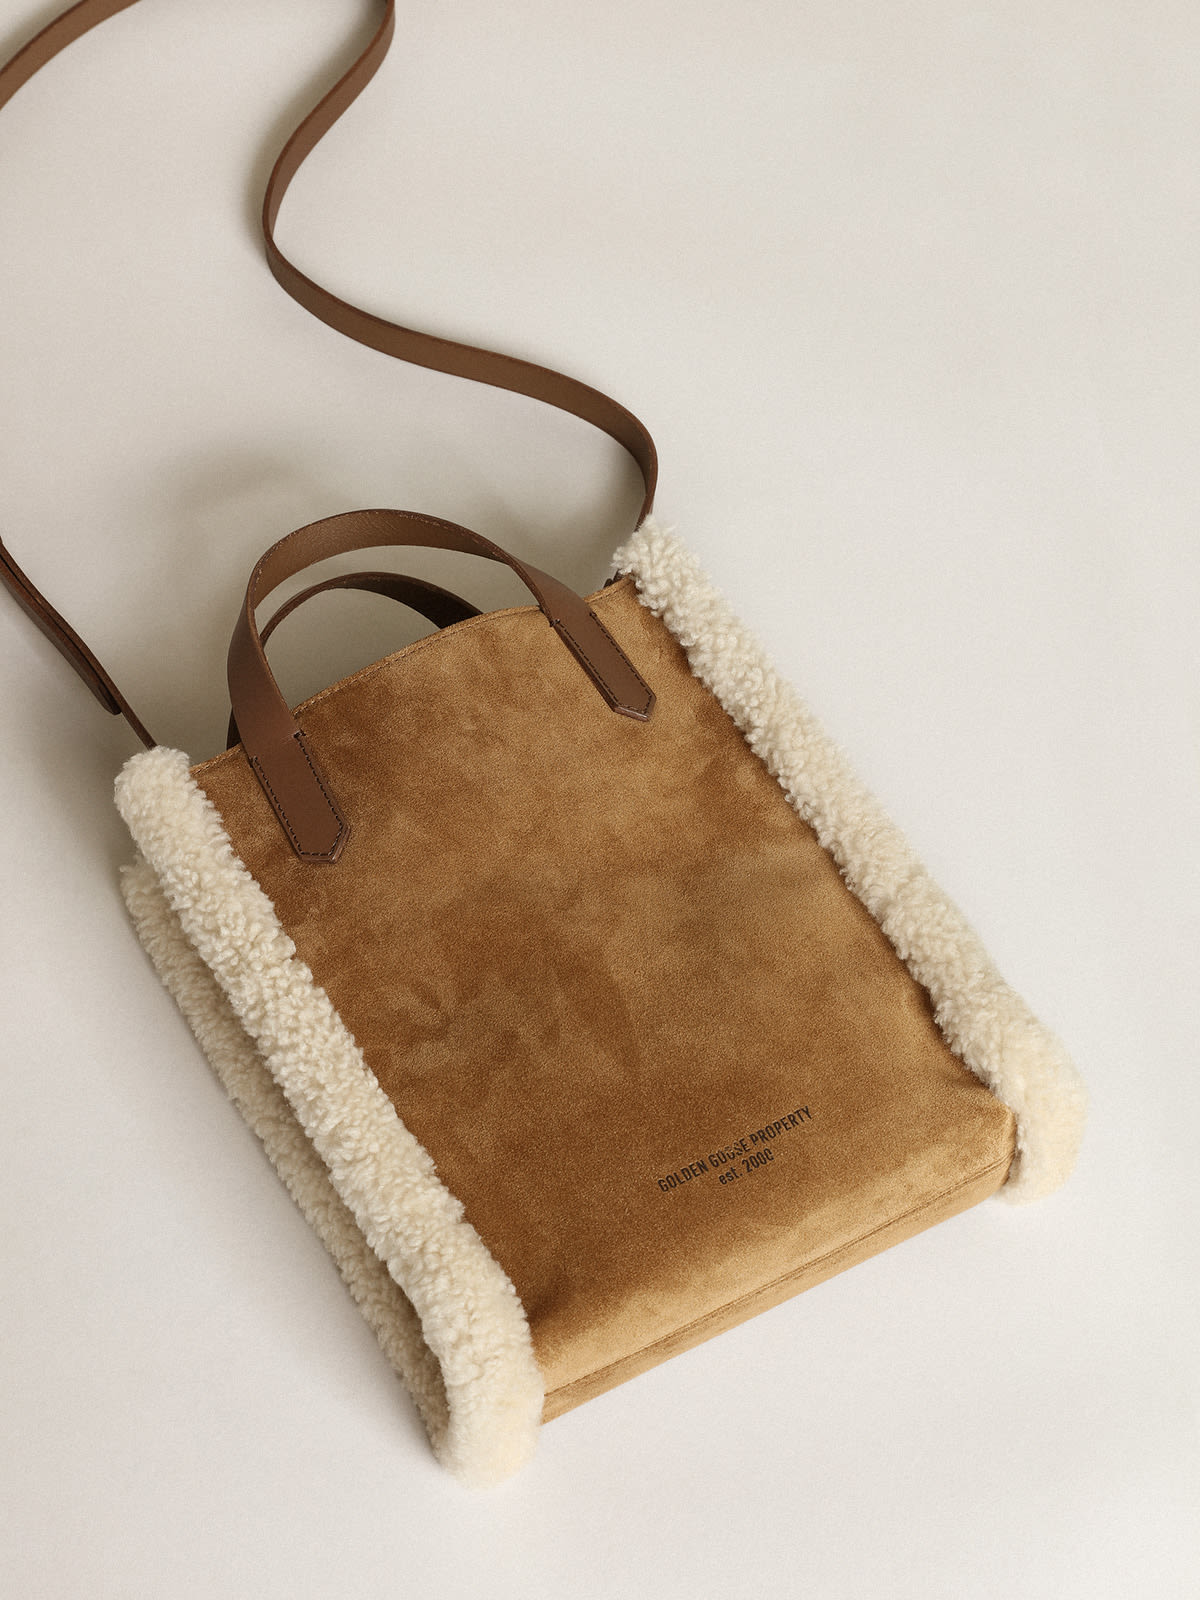 Golden Goose - Mini California Bag in suede leather with shearling trim in 